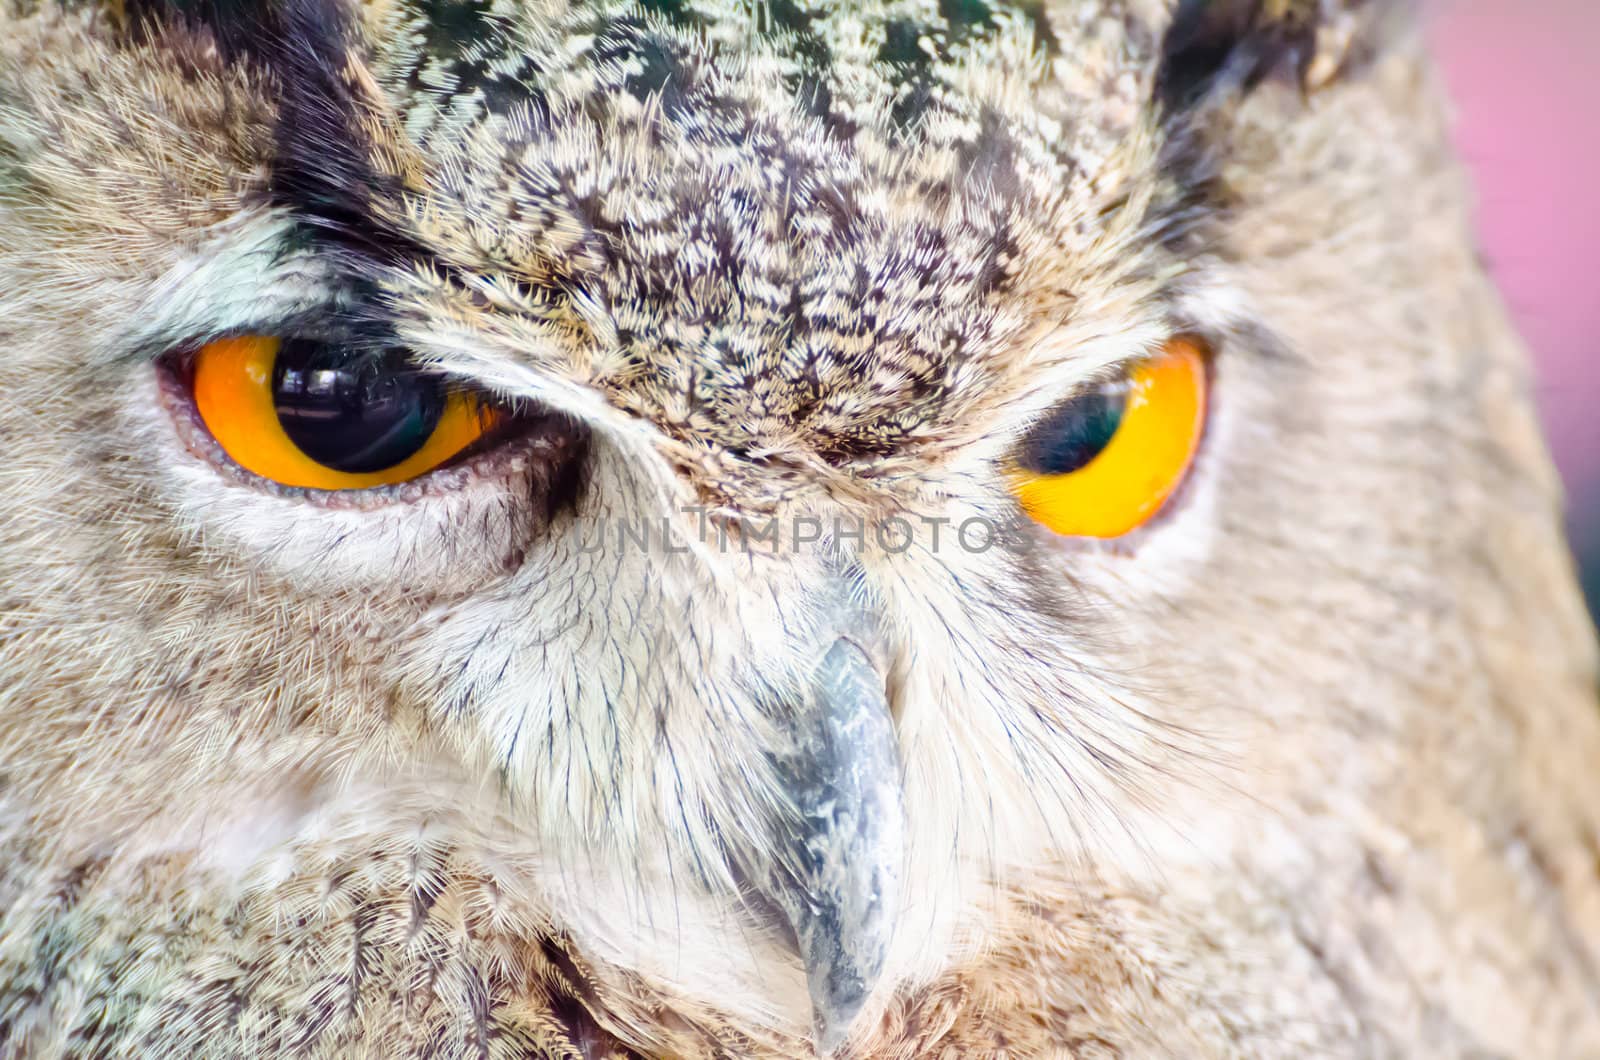 Eyes of the owl.